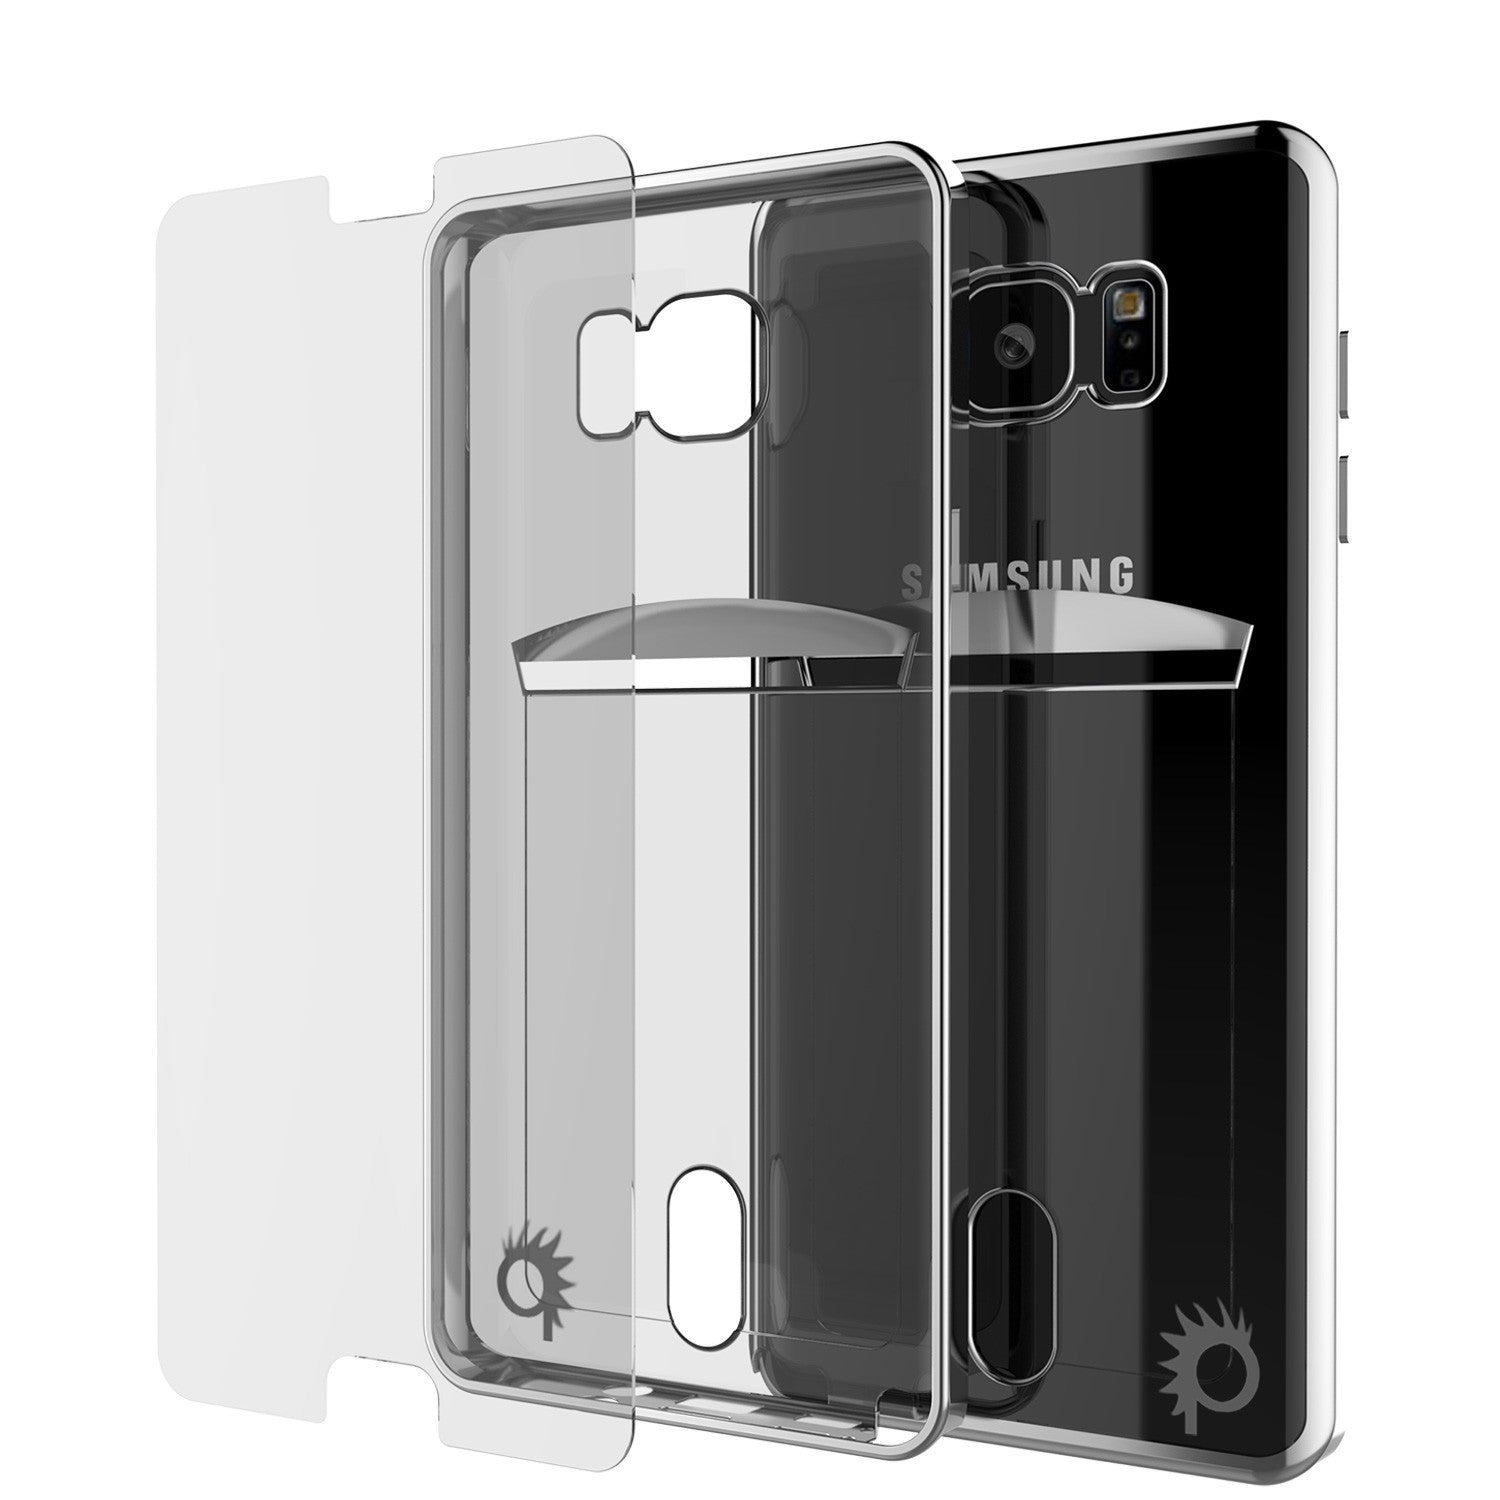 Galaxy Note 5 Case, PUNKCASE® LUCID Silver Series | Card Slot | SHIELD Screen Protector | Ultra fit (Color in image: Silver)